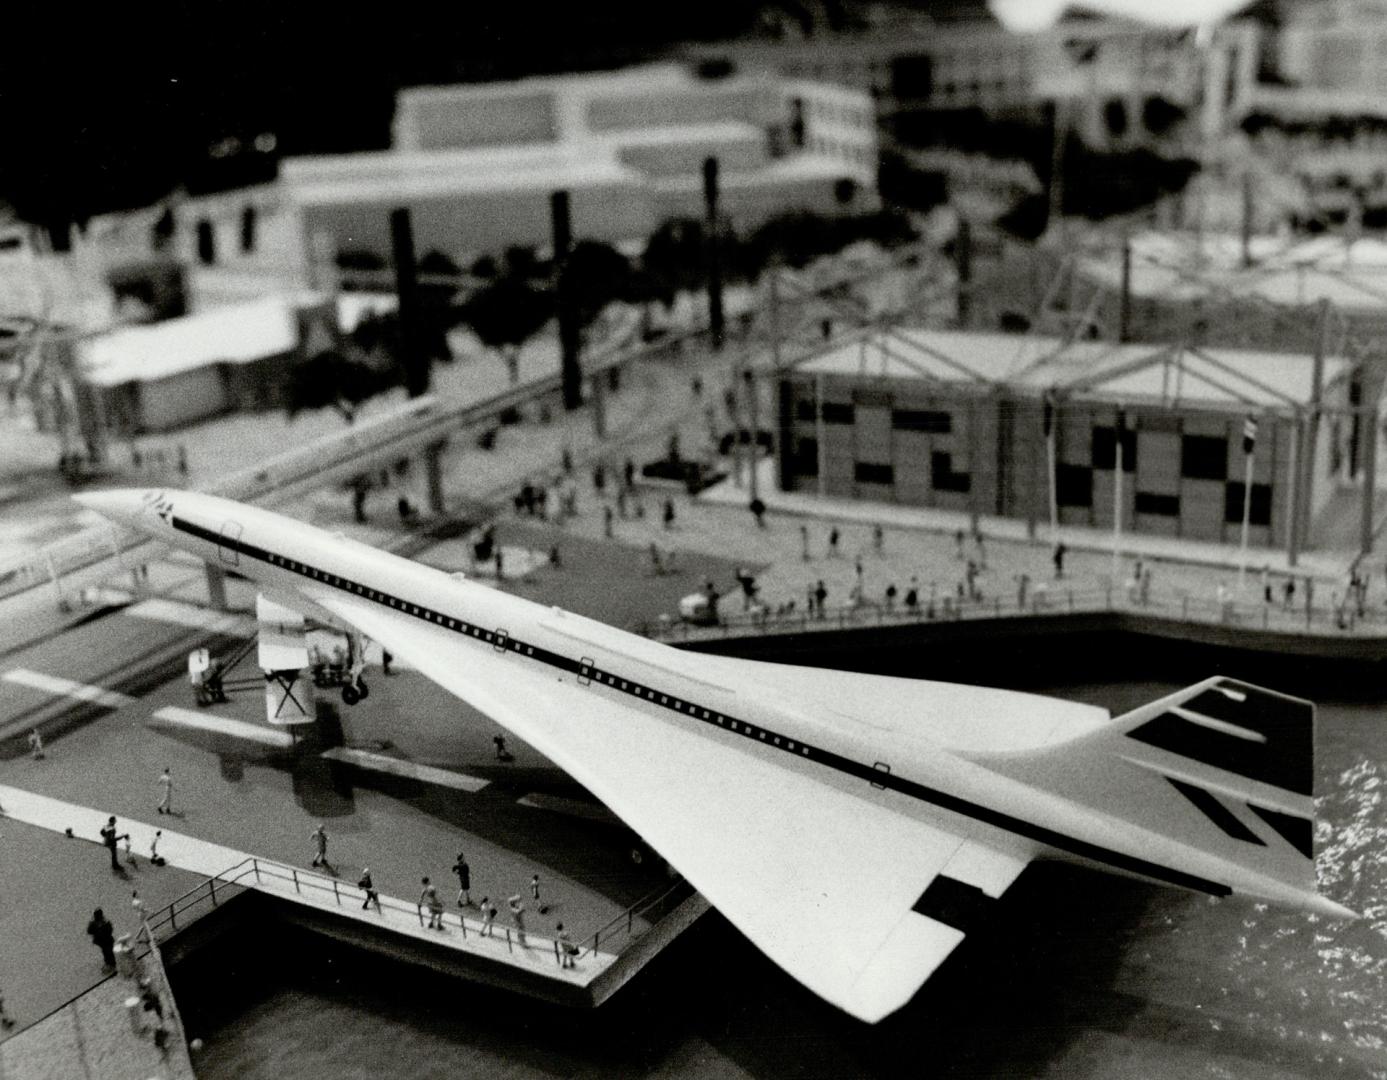 Mock-up Concorde SST fits in well with the fair's overall transportation theme